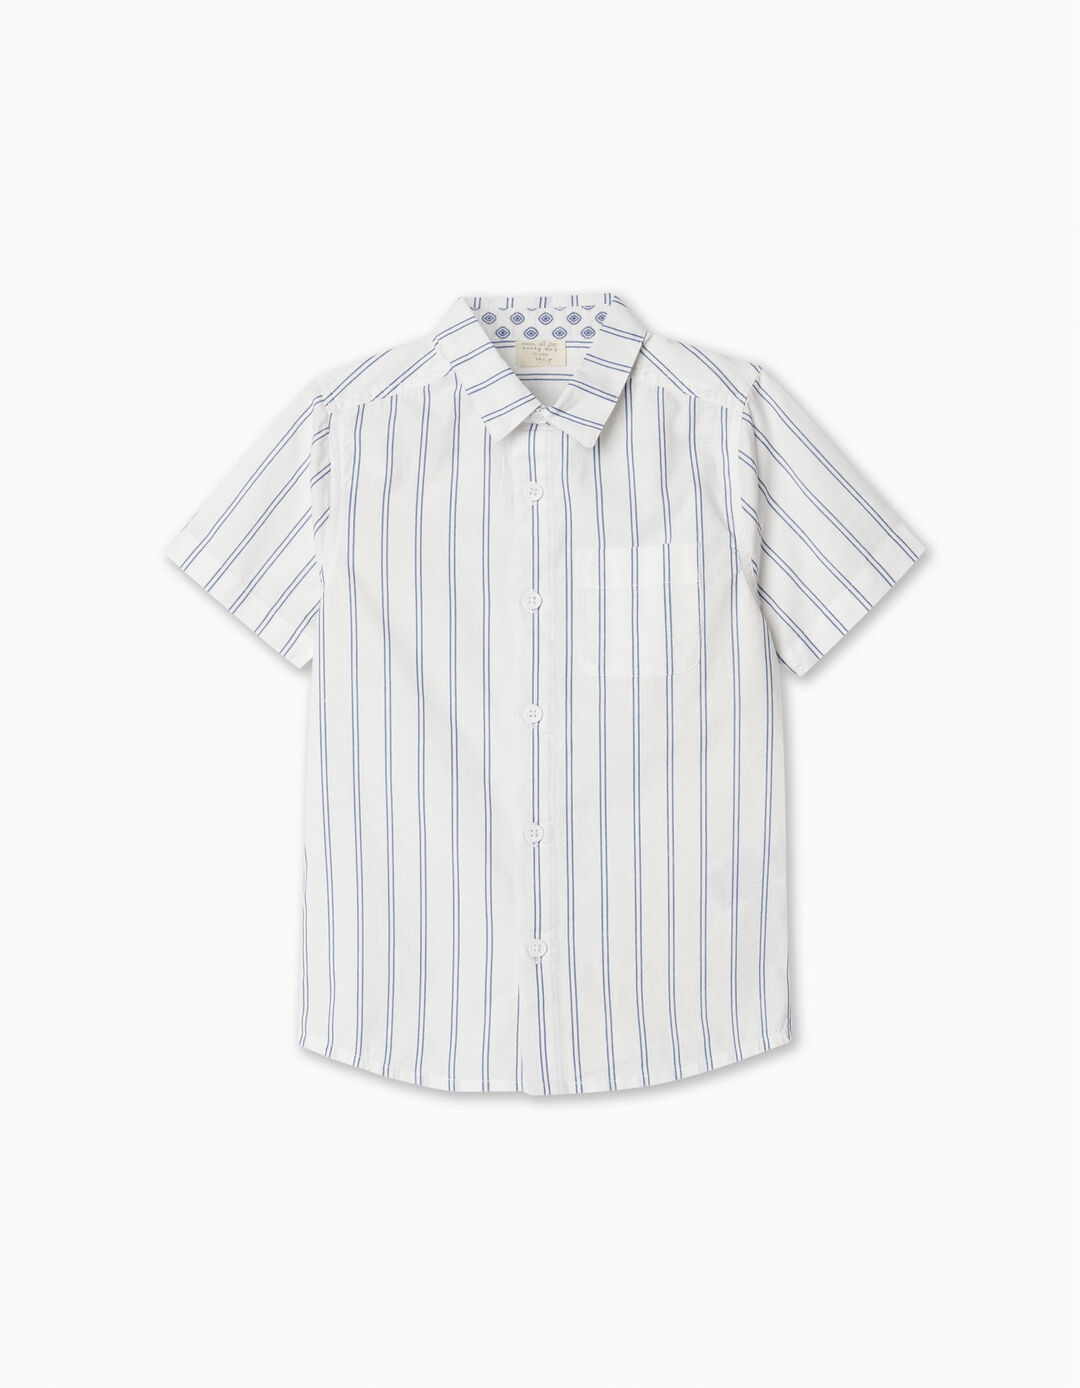 'Mother's Day' Shirt, Boy, White